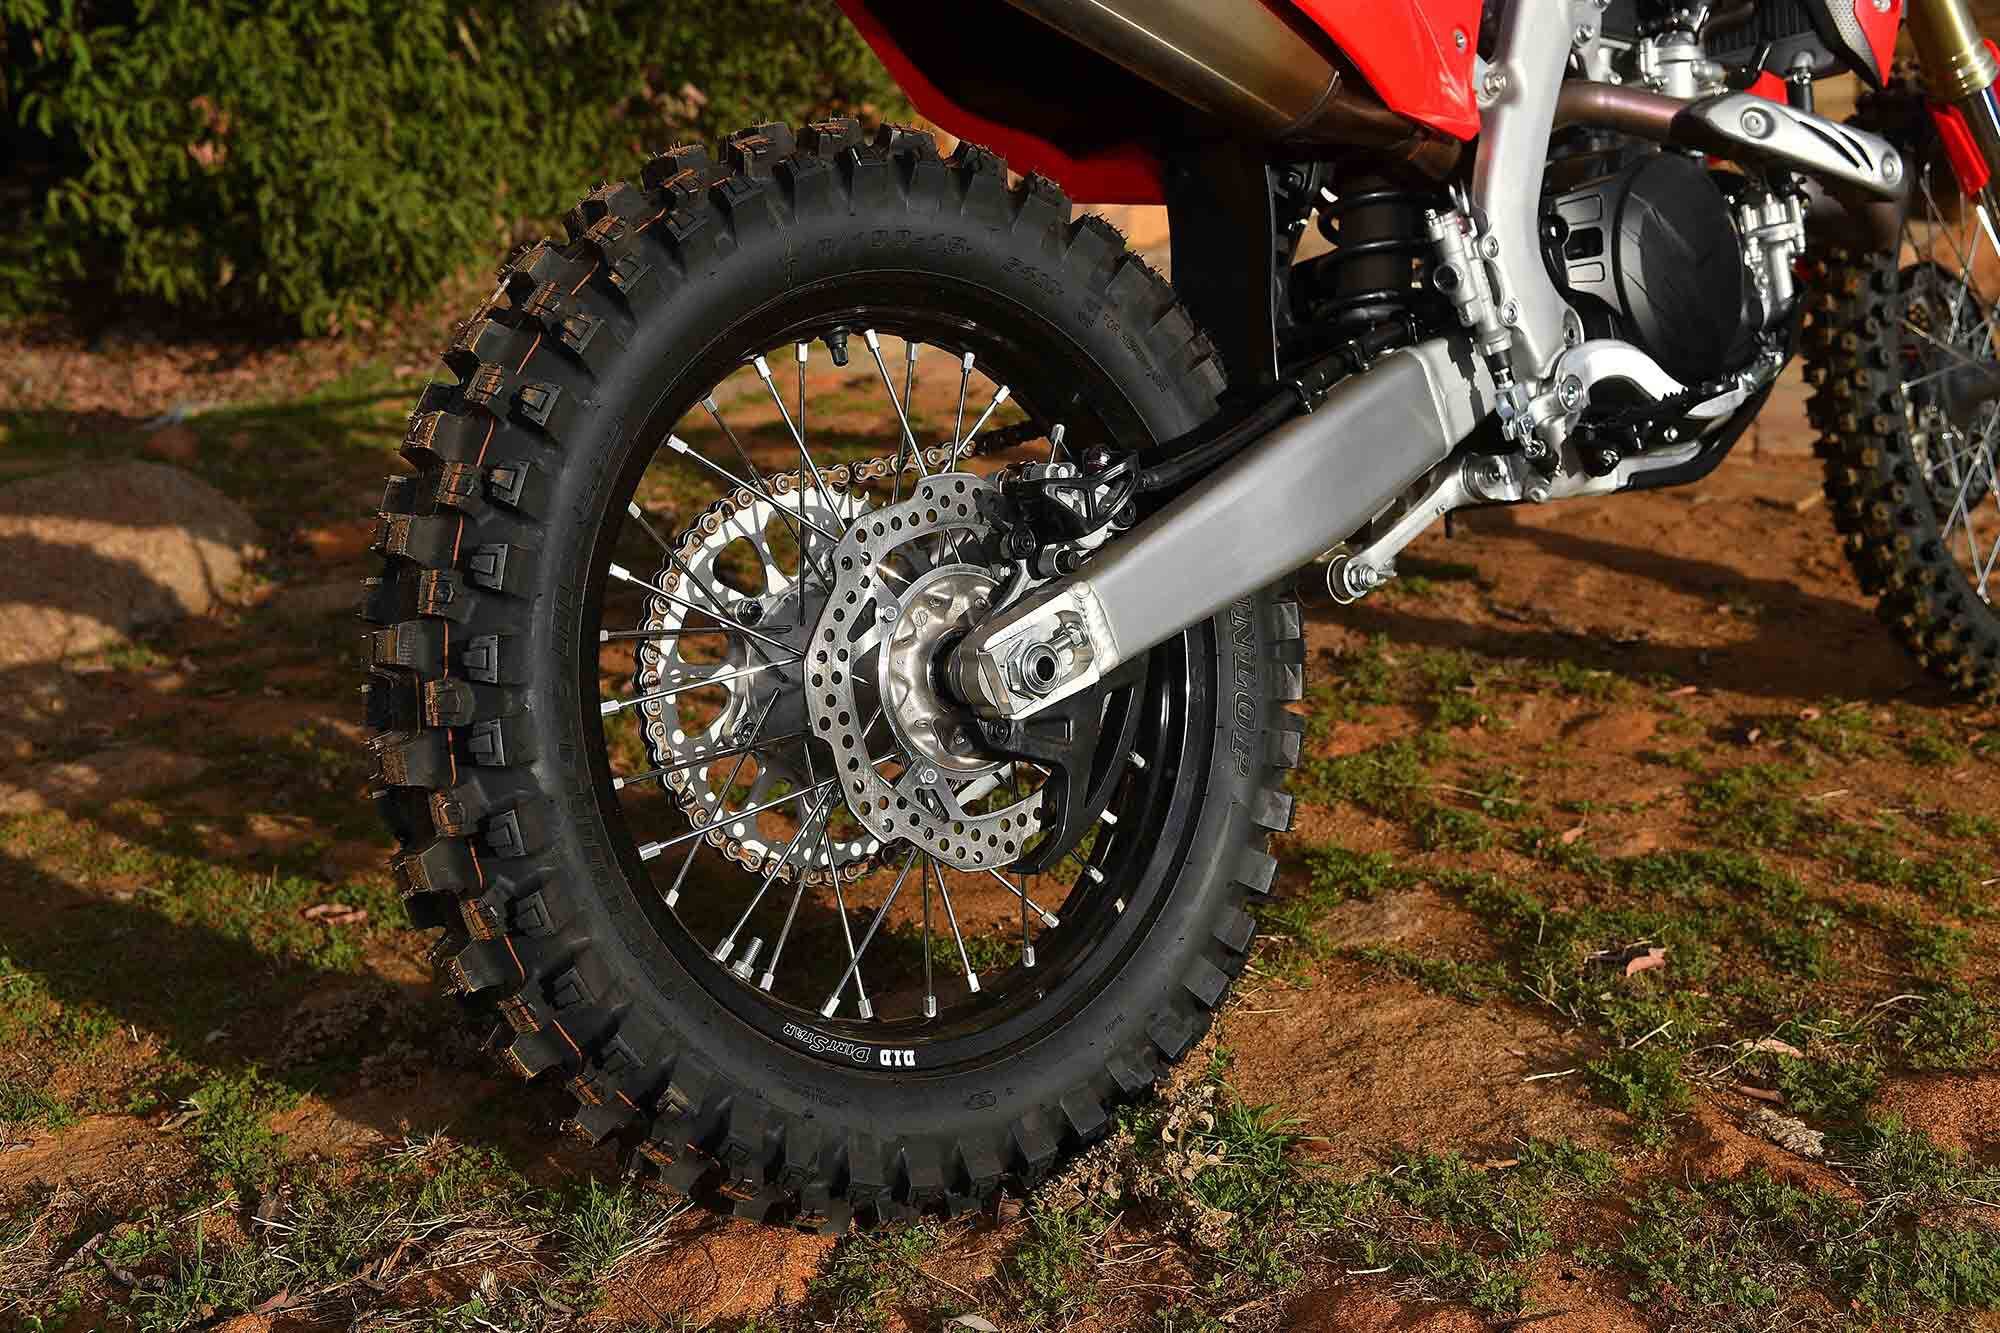 Pictured is the Dunlop Geomax MX52 tire (110/100-18), 240mm rear rotor with disc protection, single side exhaust, D.I.D DirtStar rim, and rearward axle placement that gives the bike even more stability.